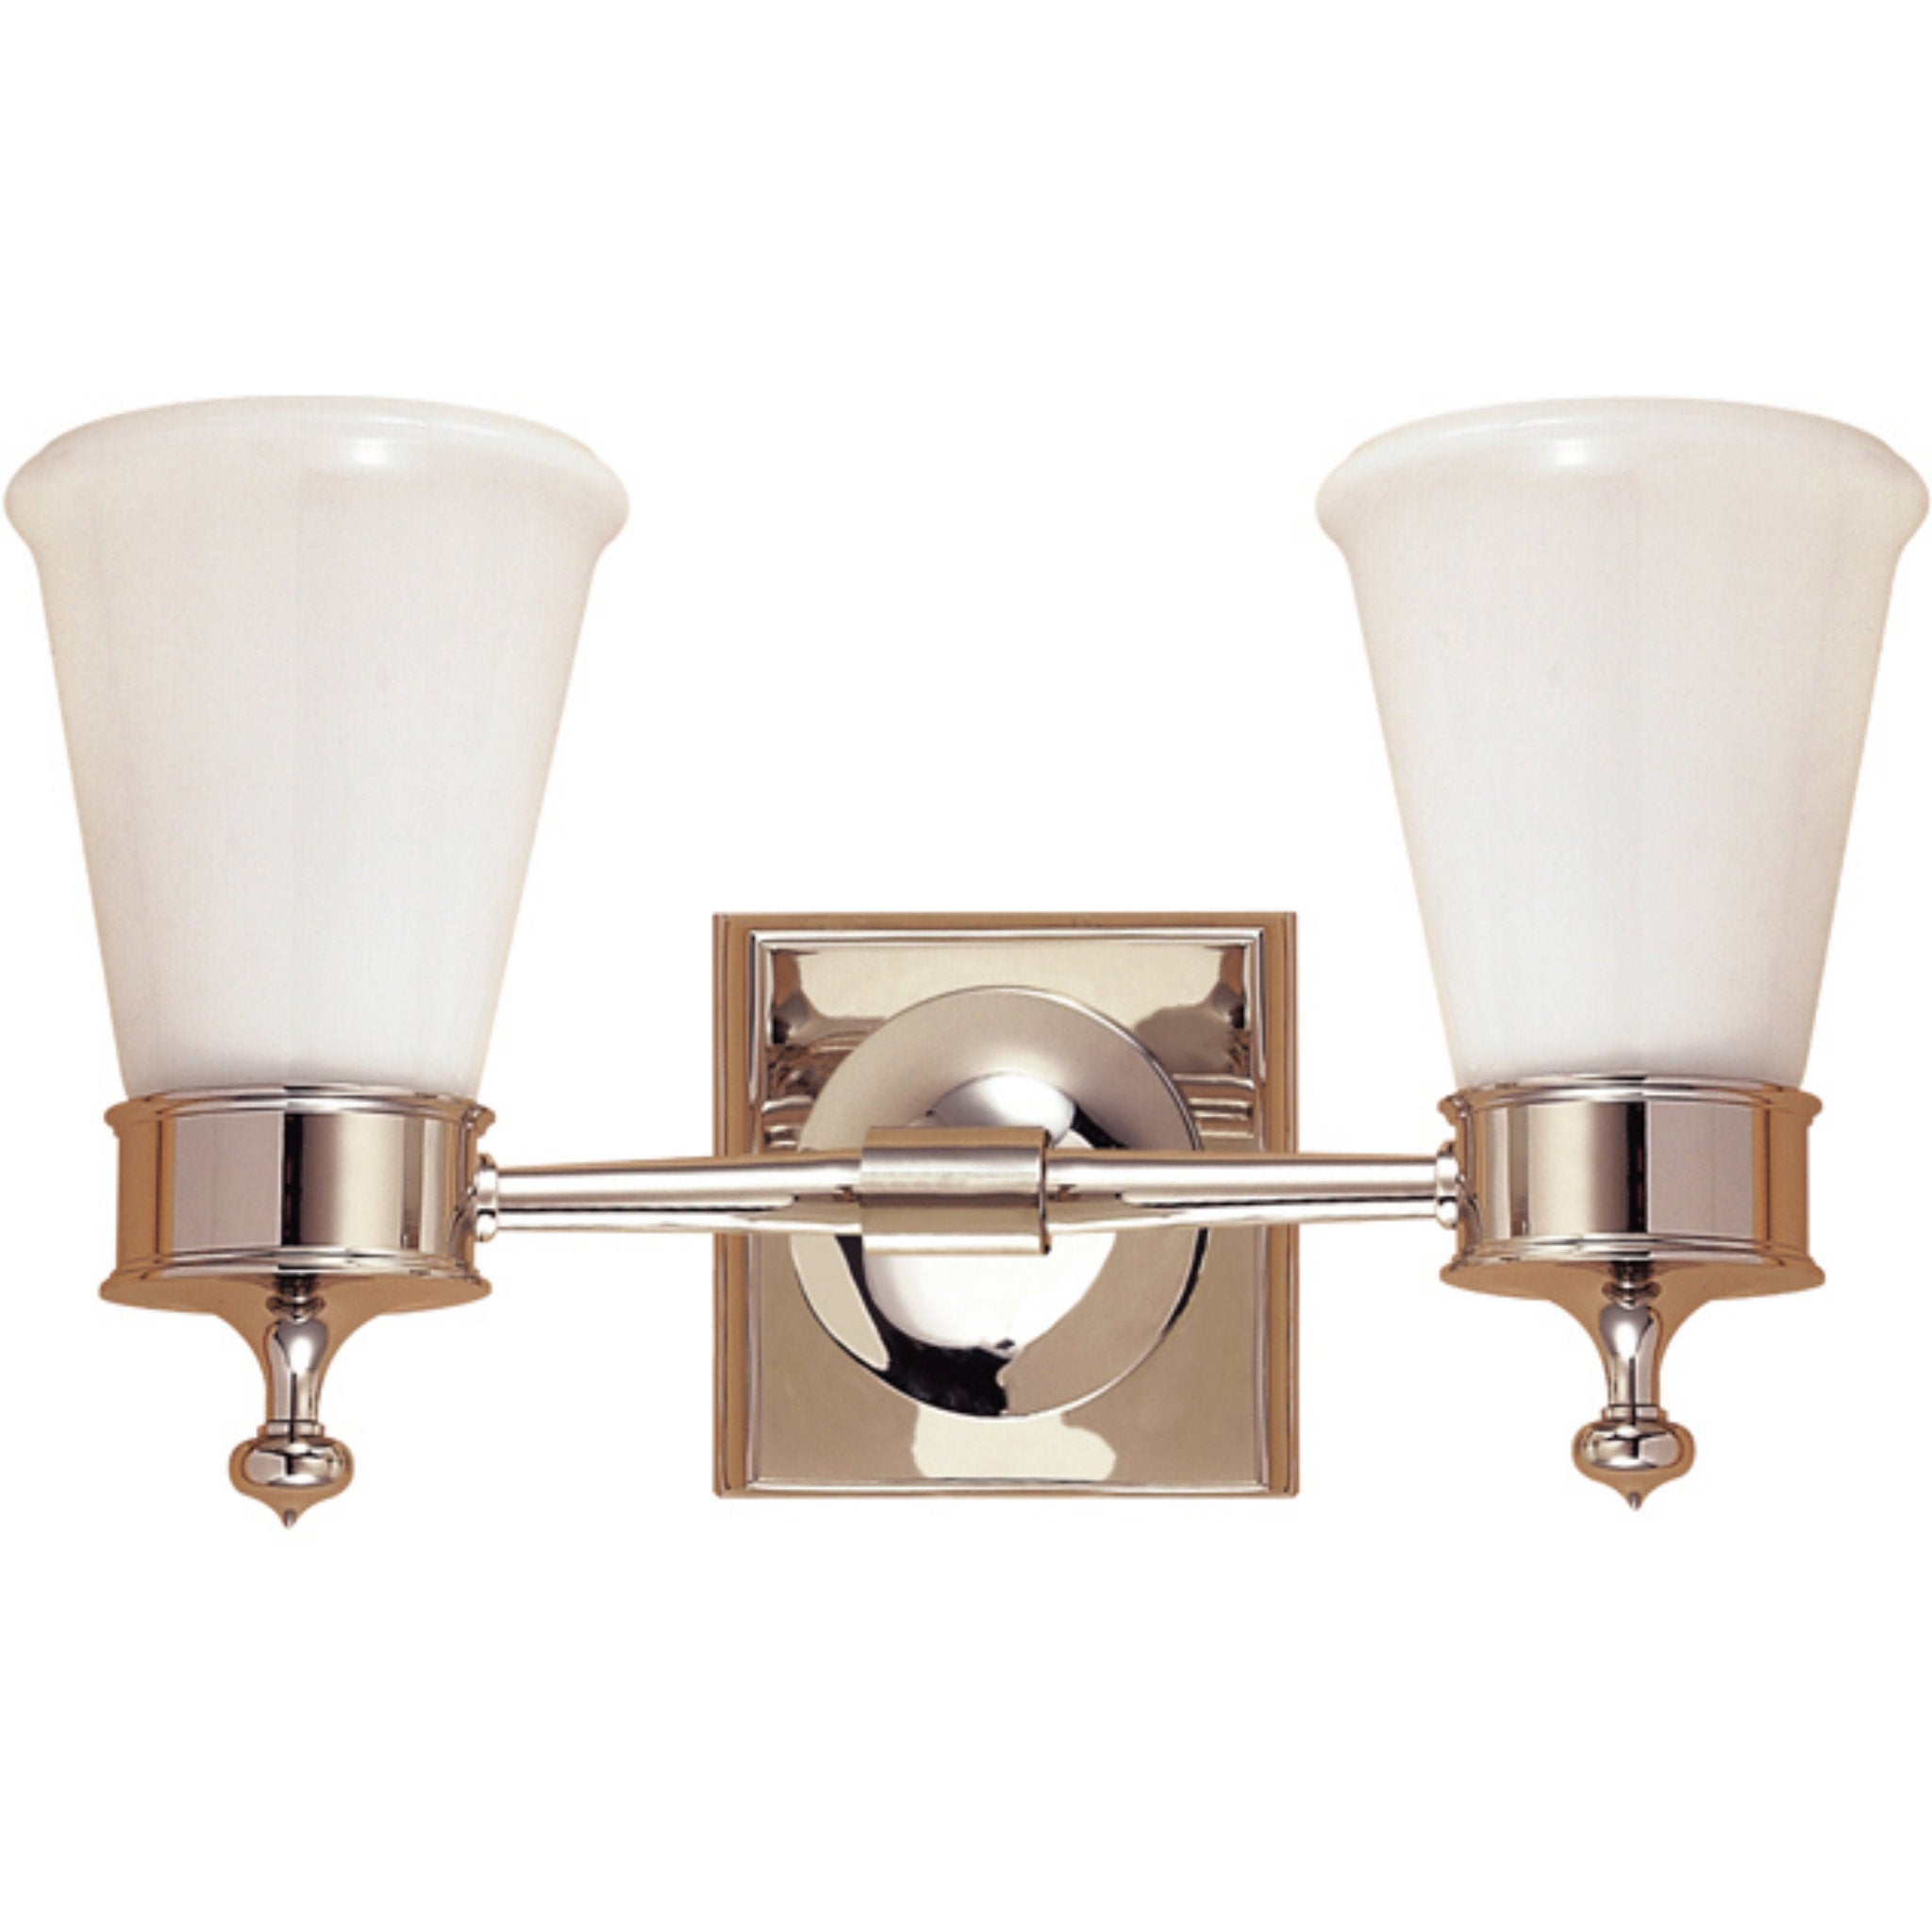 Visual Comfort Siena Double Sconce in Polished Nickel with White Glass